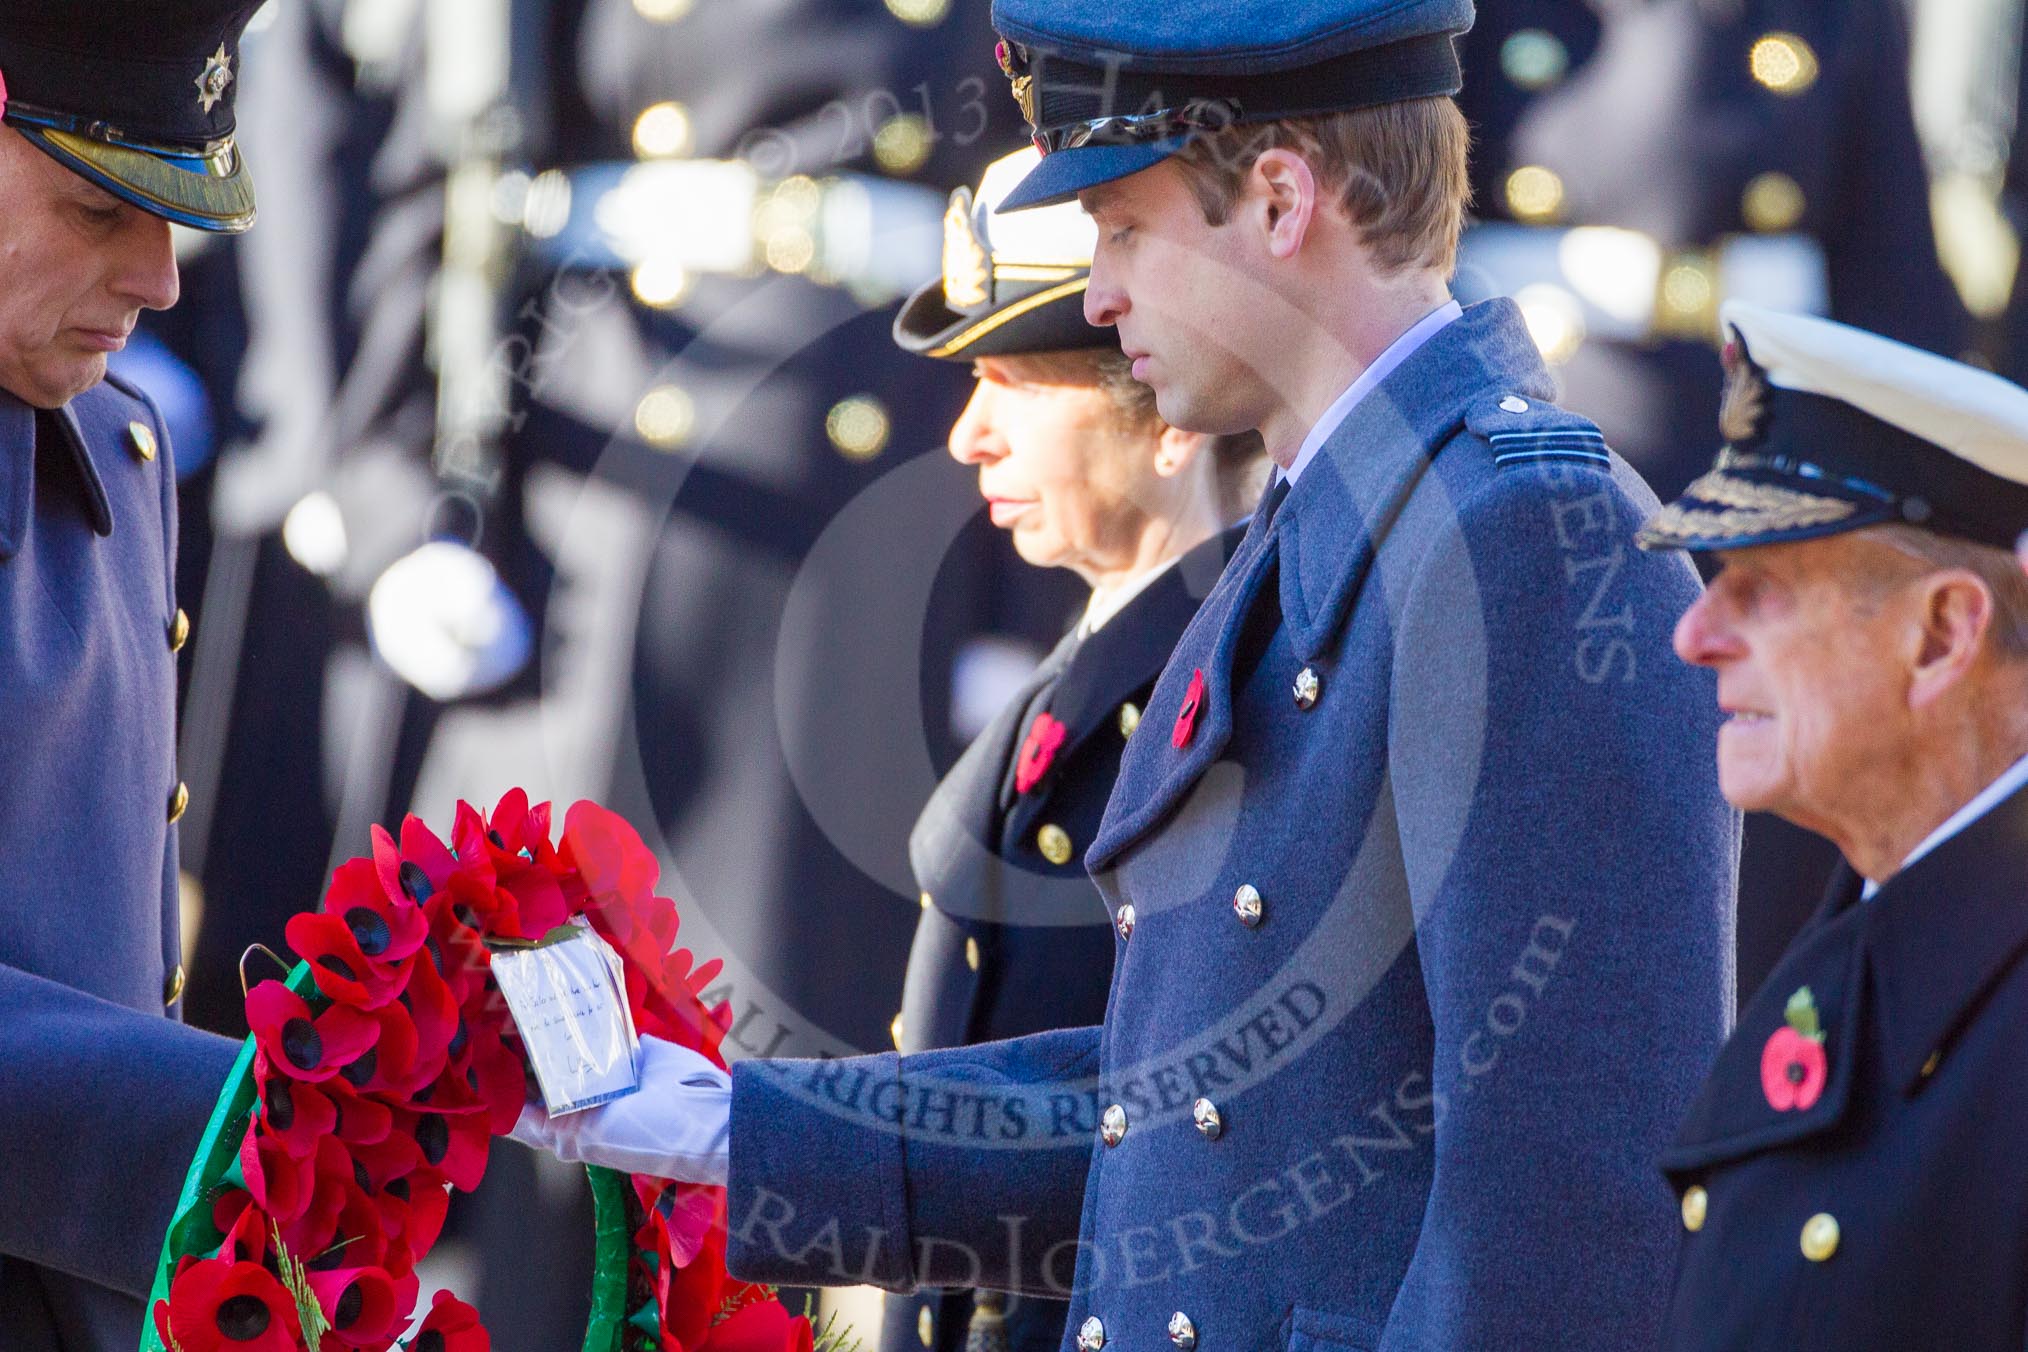 HRH The Duke of Cambridge is given the wreath by Major James Lowther-Pinkerton.